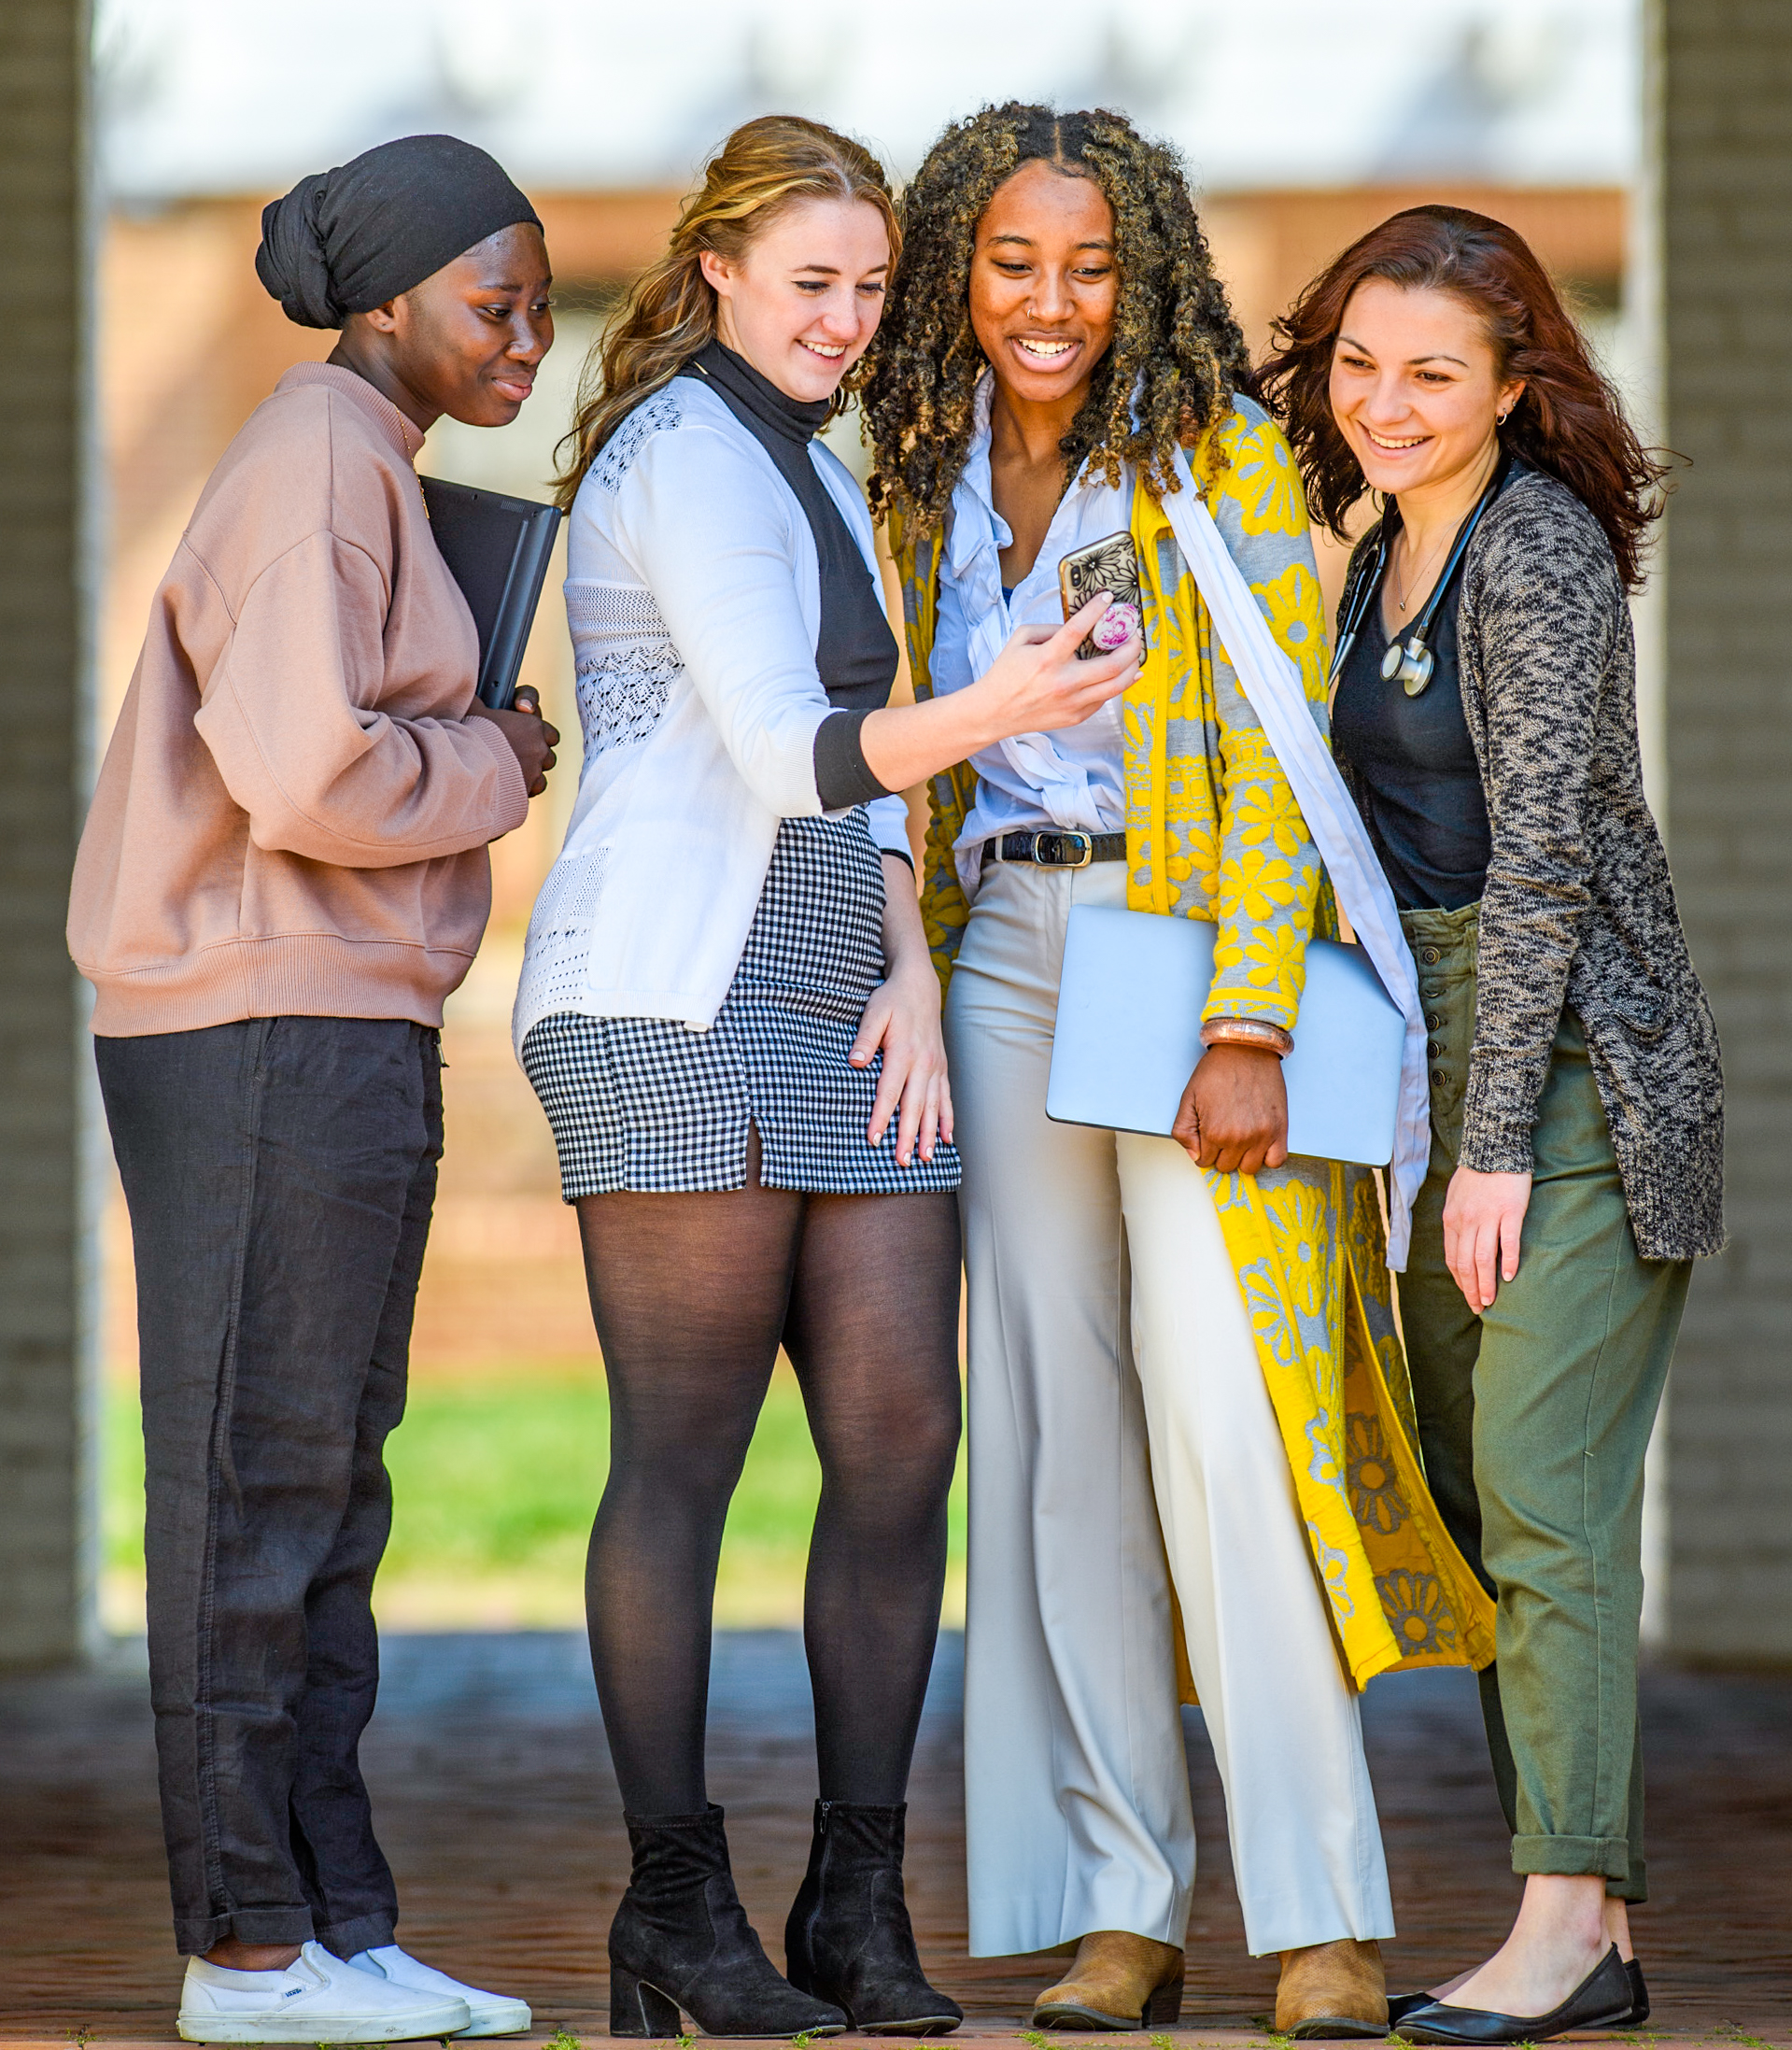 Photo of four smiling students on the campus of St. Mary's College of Maryland looking at an internship posting on a mobile phone